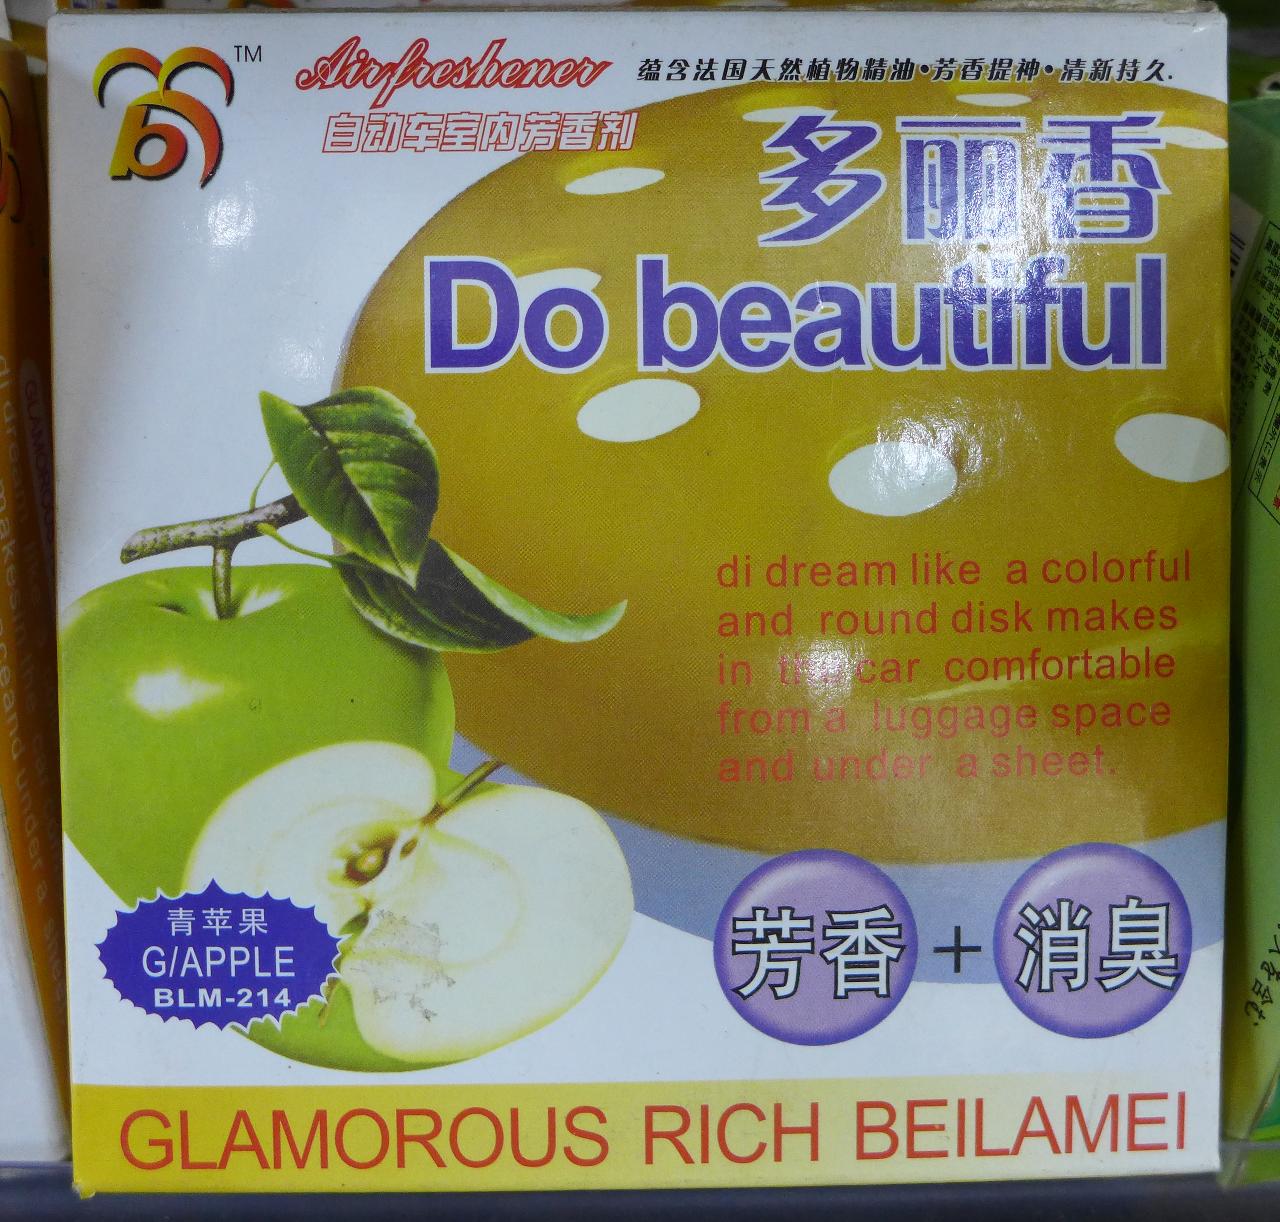 Do beautiful. di dream like a colorful and round disk makes in the car comfortable from a luggage space and under a sheet. GLAMOUROUS RICH BEILAMEI